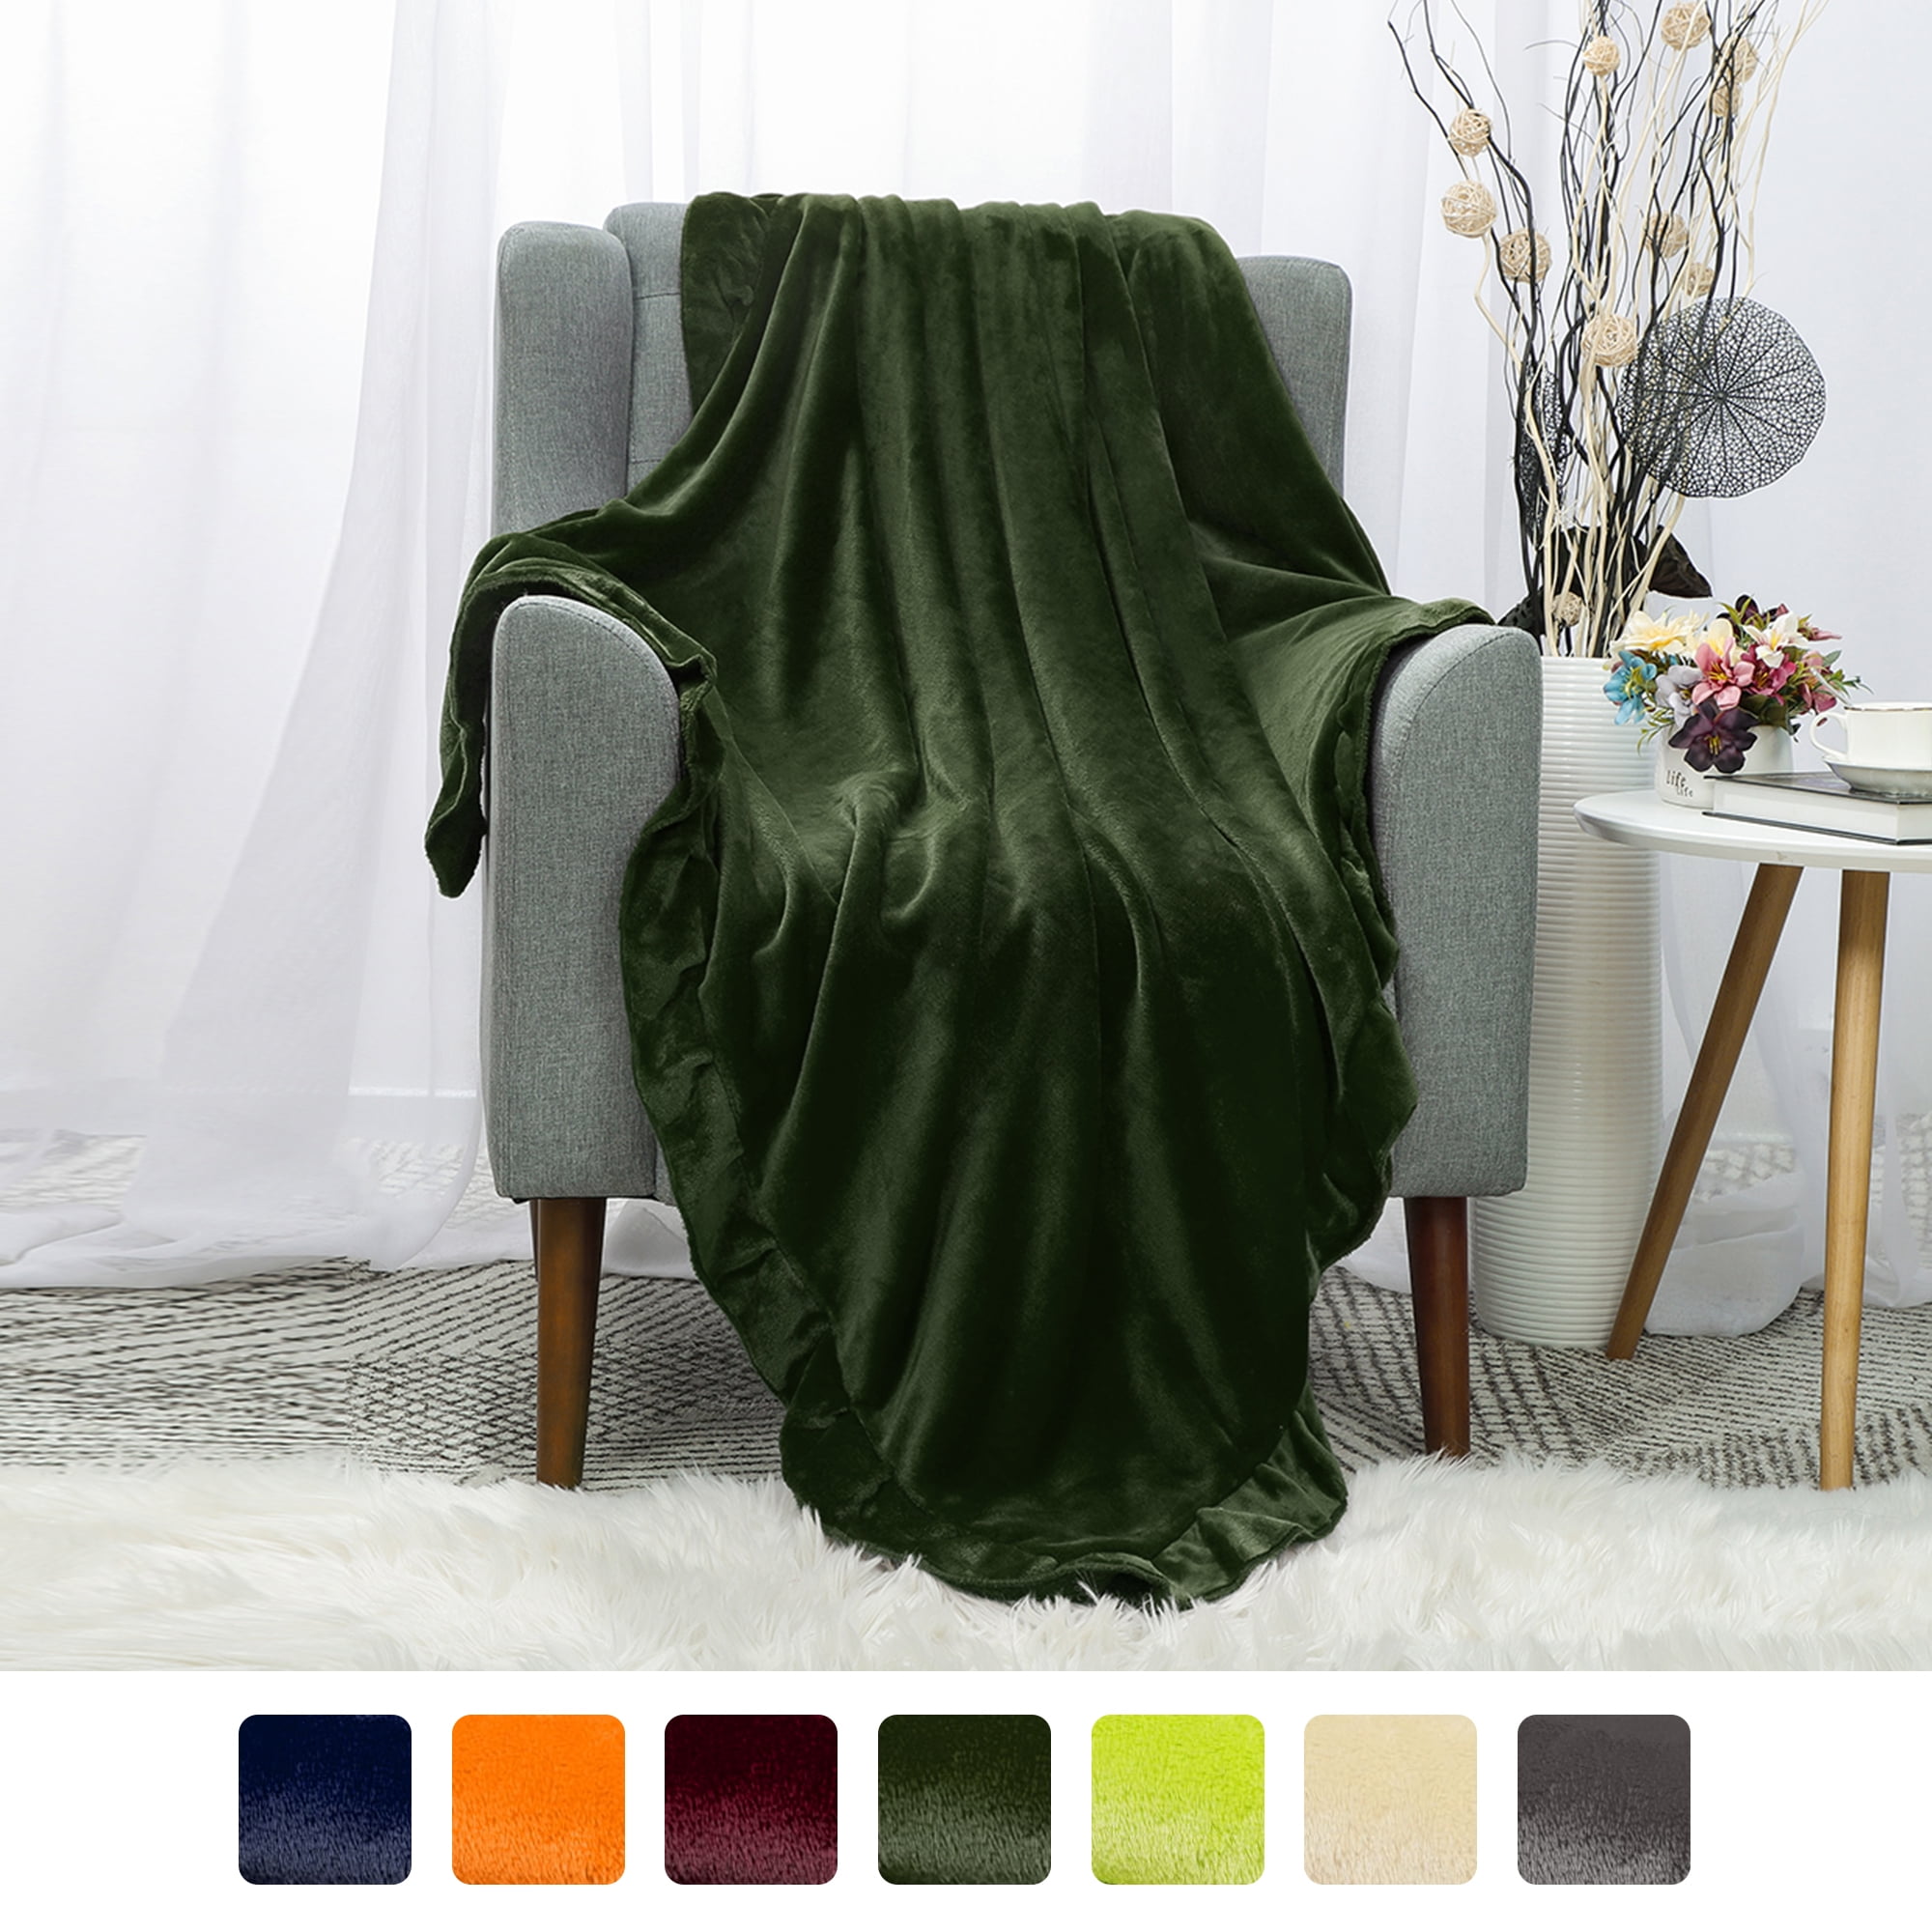 Luxury Sofa Throws and Blankets with Ruffle Trim Chair Lightweight Plush Microfiber Solid Decor Blanket for Couch,Bed 50 x 60 PiccoCasa Flannel Fleece Blanket Throw Size Lime Green